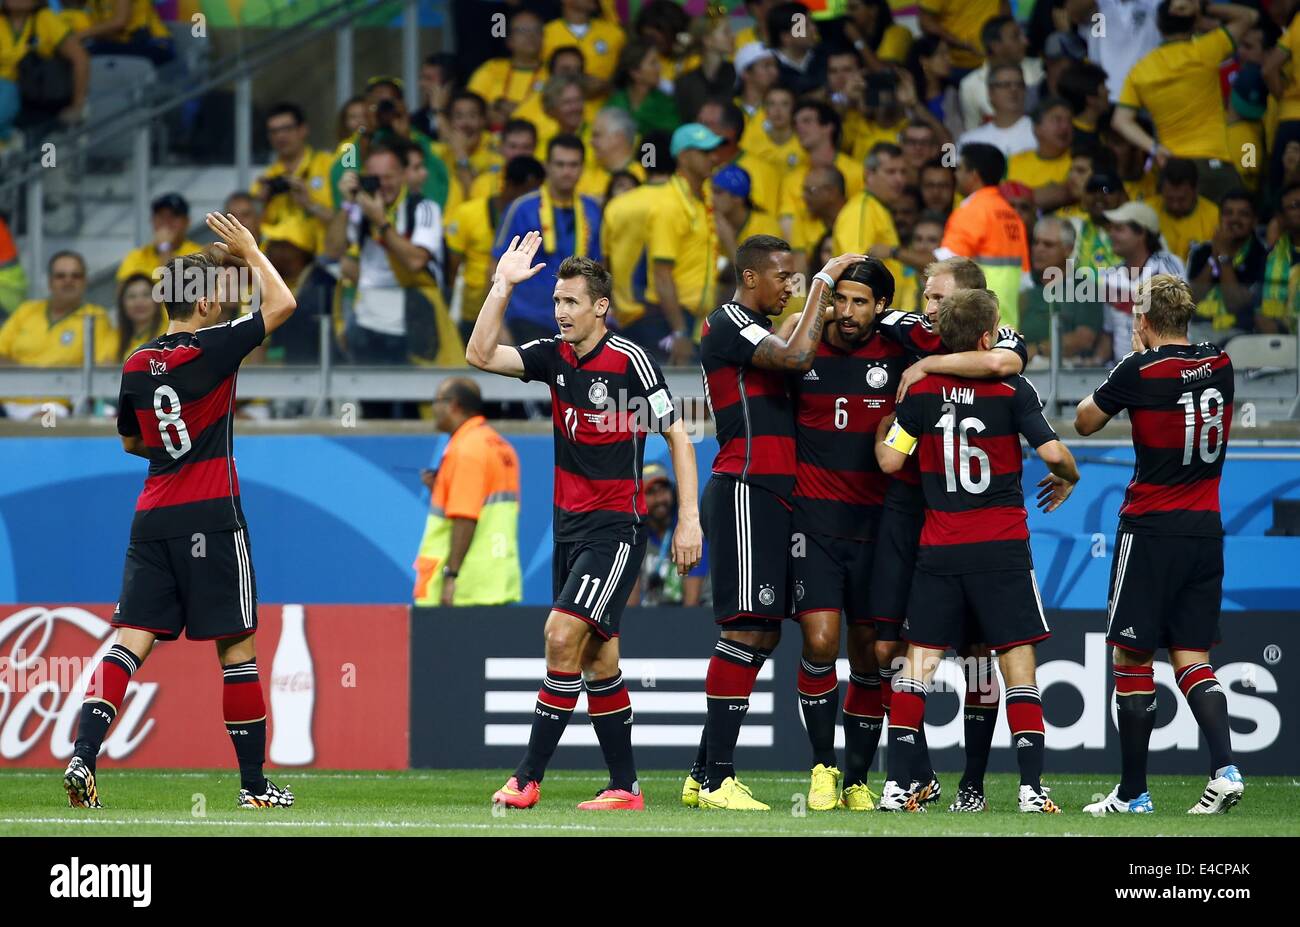 Belo Horizonte, Brazil. 8th July, 2014. Brazil's Miroslav Klose (2nd L) celebrates a goal during a semifinal match between Brazil and Germany of 2014 FIFA World Cup at the Estadio Mineirao Stadium in Belo Horizonte, Brazil, on July 8, 2014. Credit:  Chen Jianli/Xinhua/Alamy Live News Stock Photo